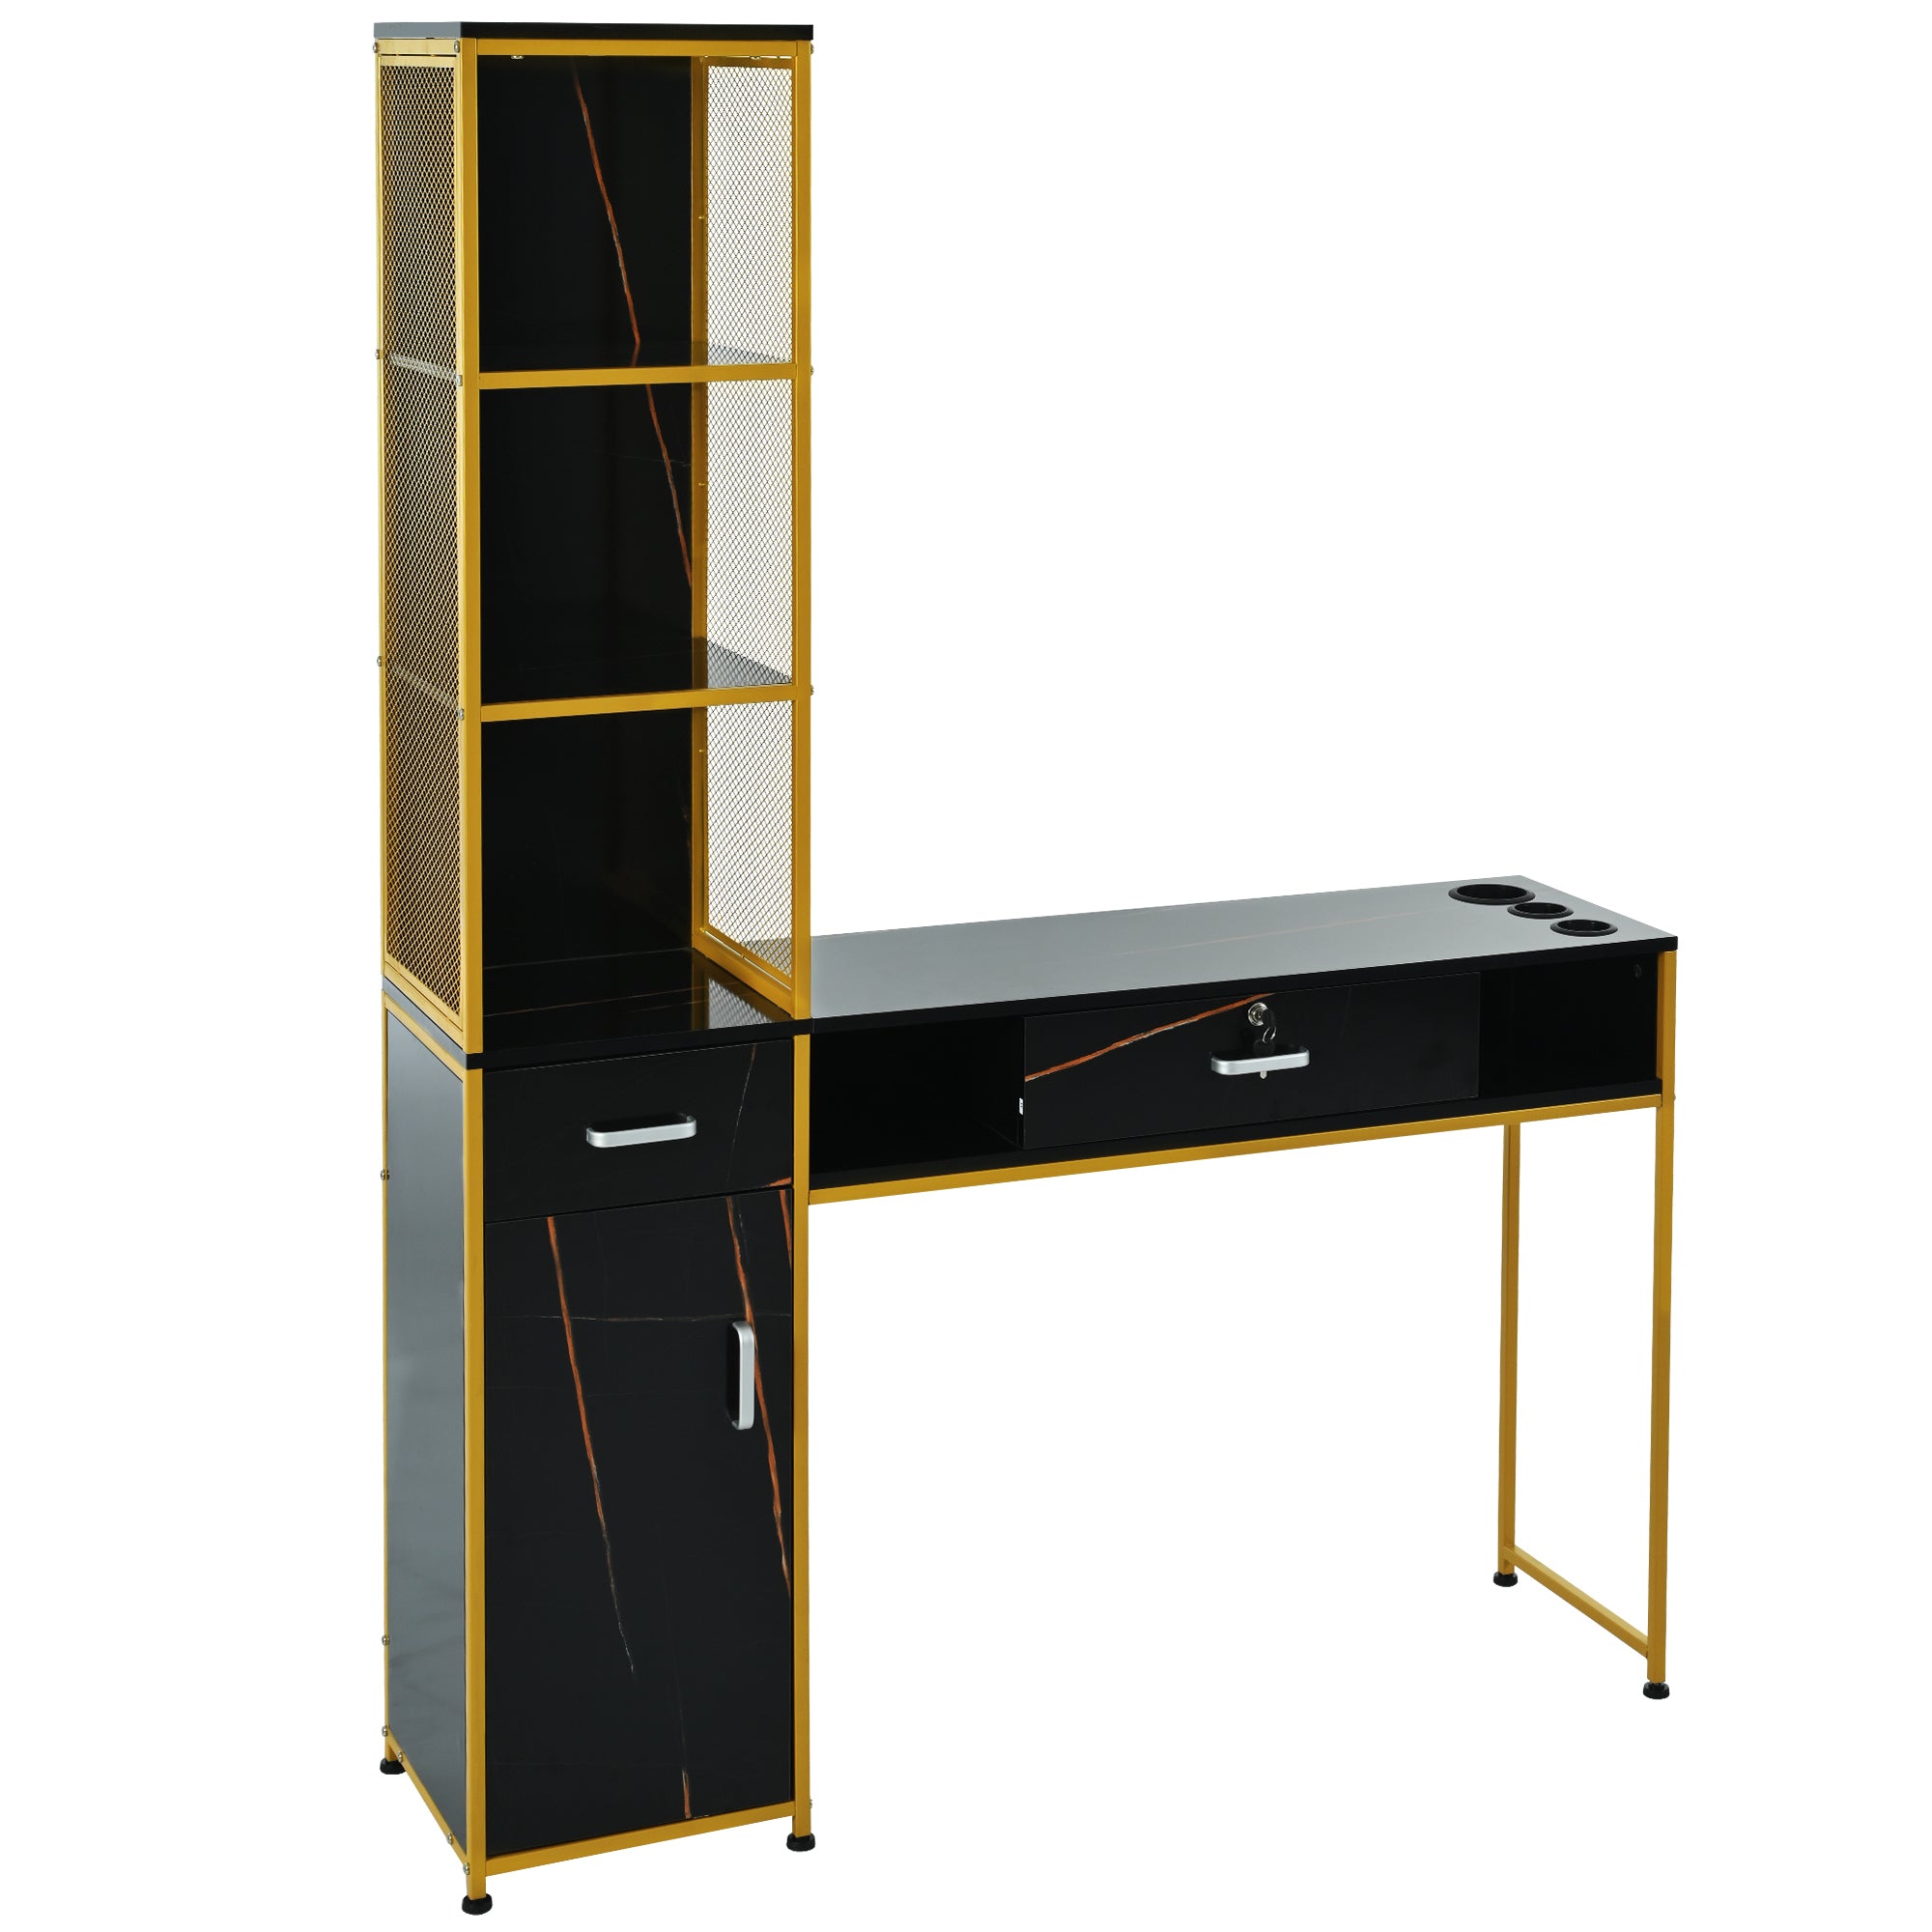 🆓🚛 Barber Salon Station for Hair Stylist, Beauty Salon Station With Lockable Drawer, Left Shelf and Storage Cabinet, Beauty Spa Equipment, Mirror Not Included, Black & Yellow